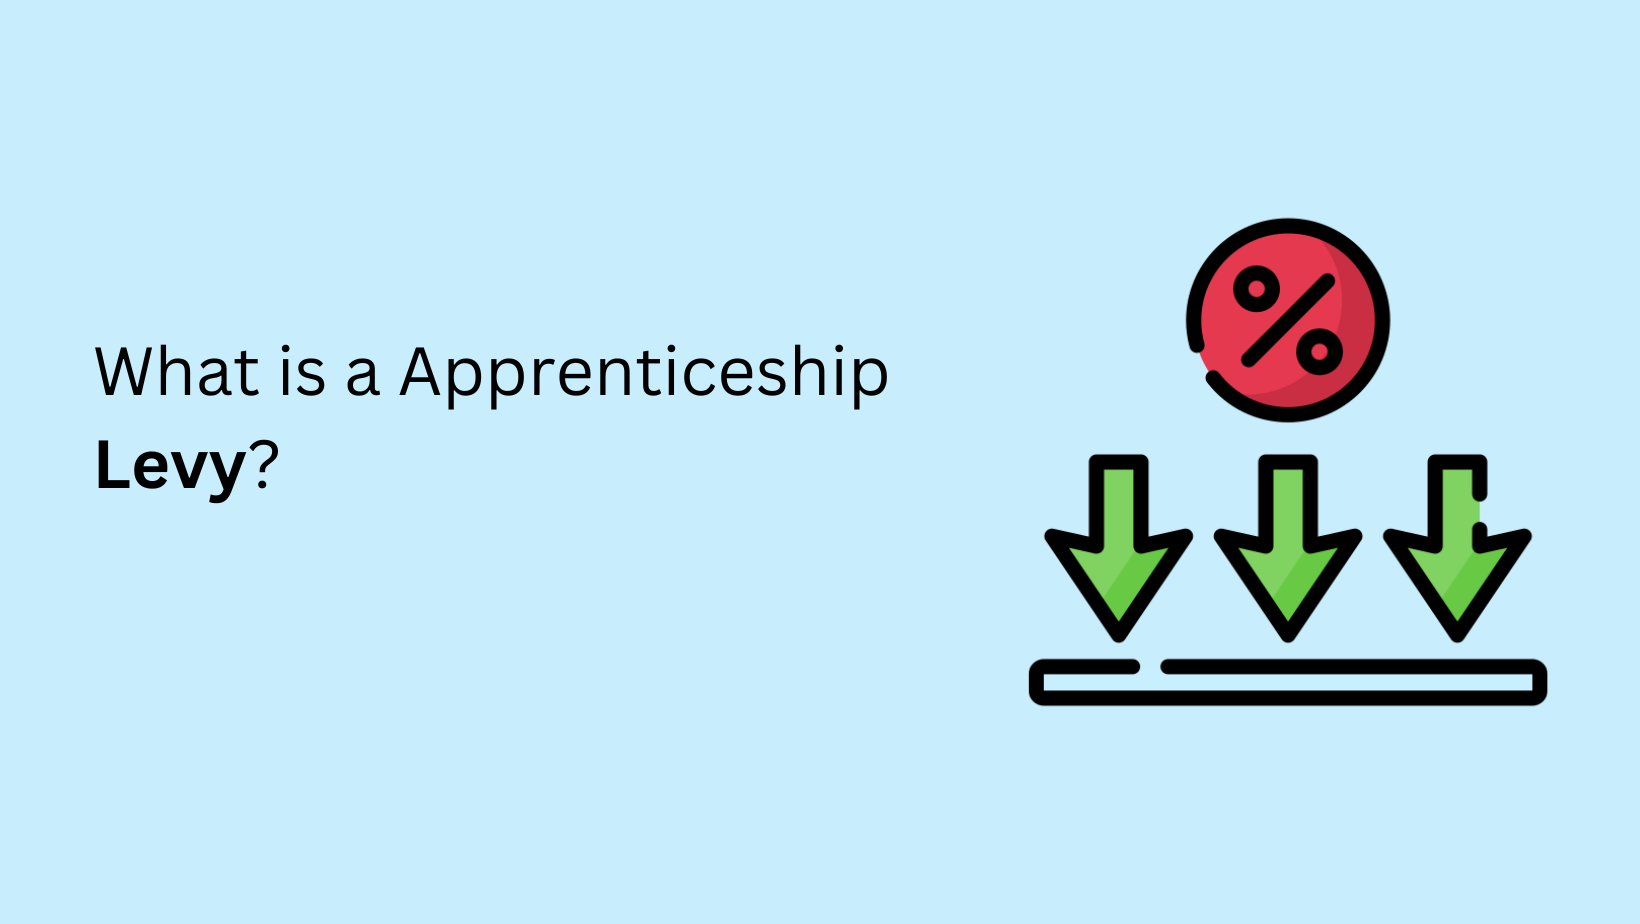 What is a Apprenticeship Levy